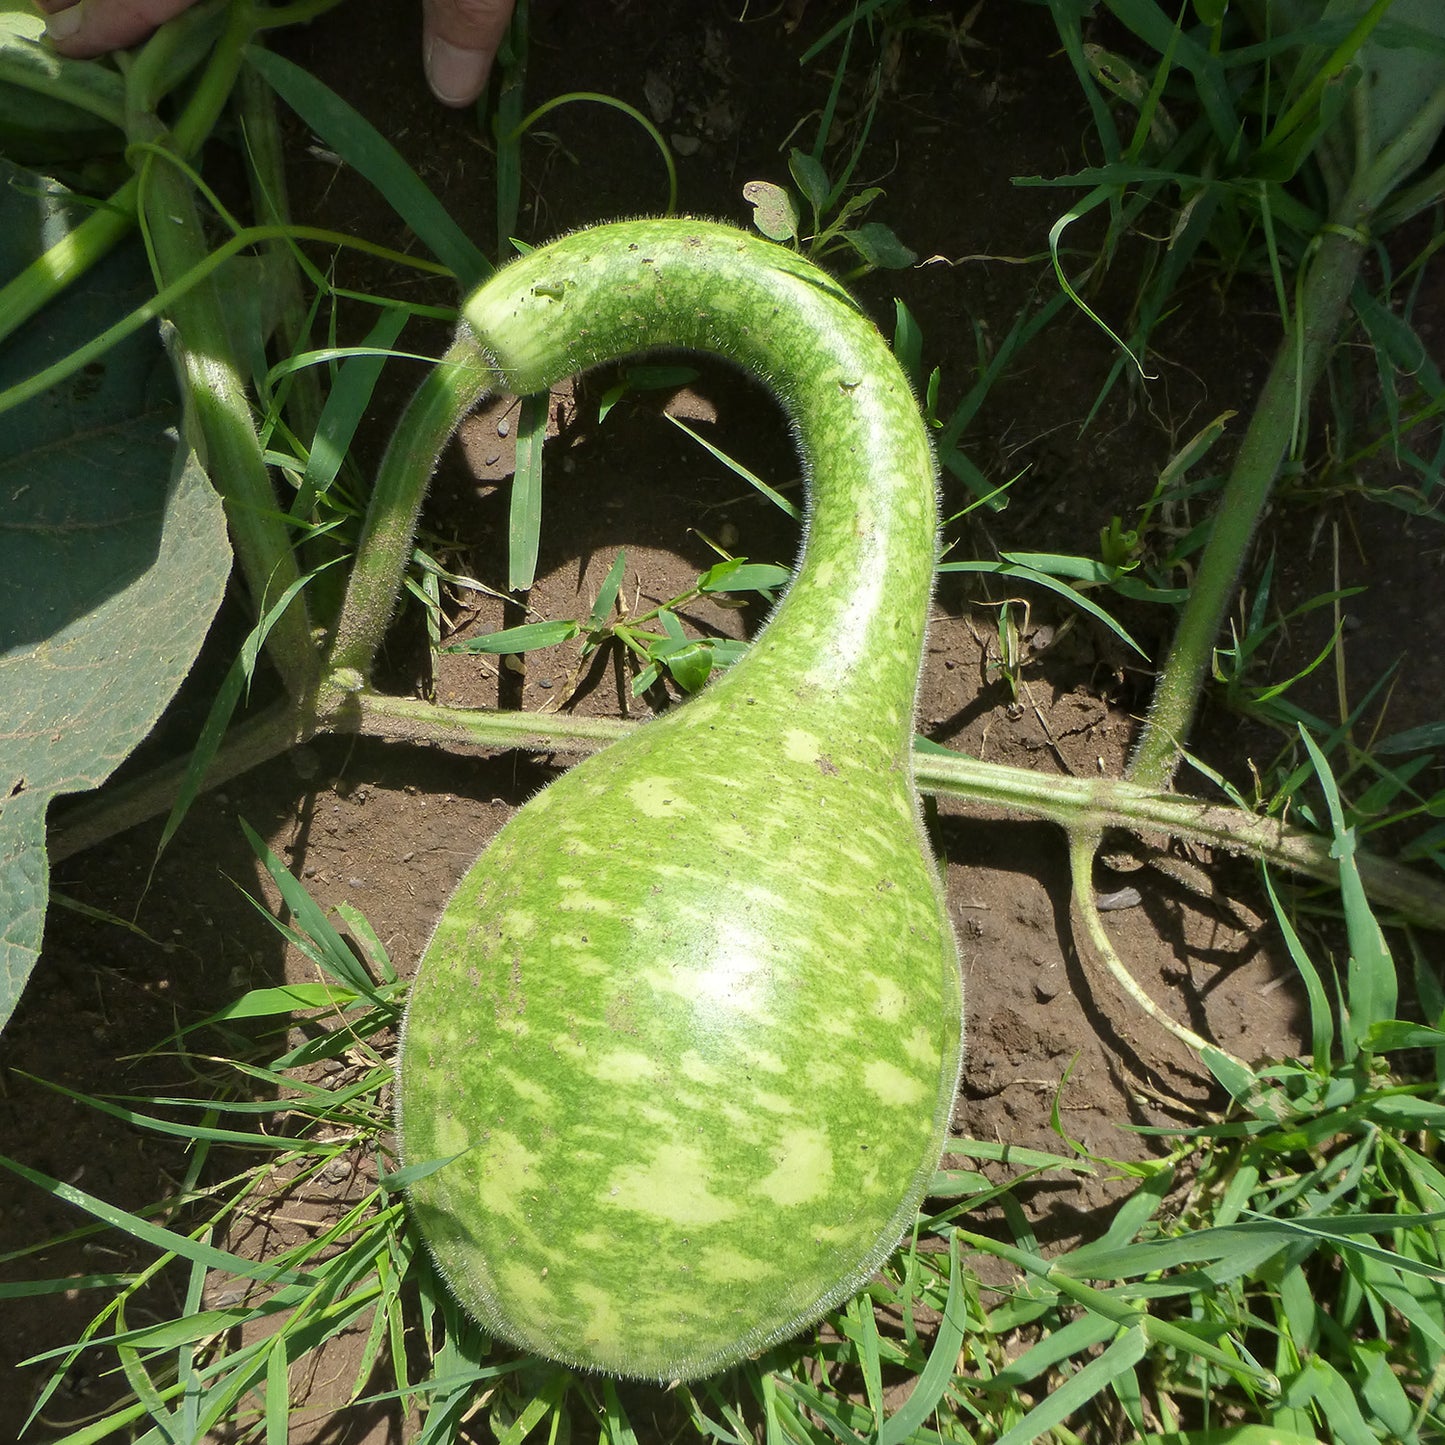 Load image into Gallery viewer, Mesilla Large Dipper Gourd
